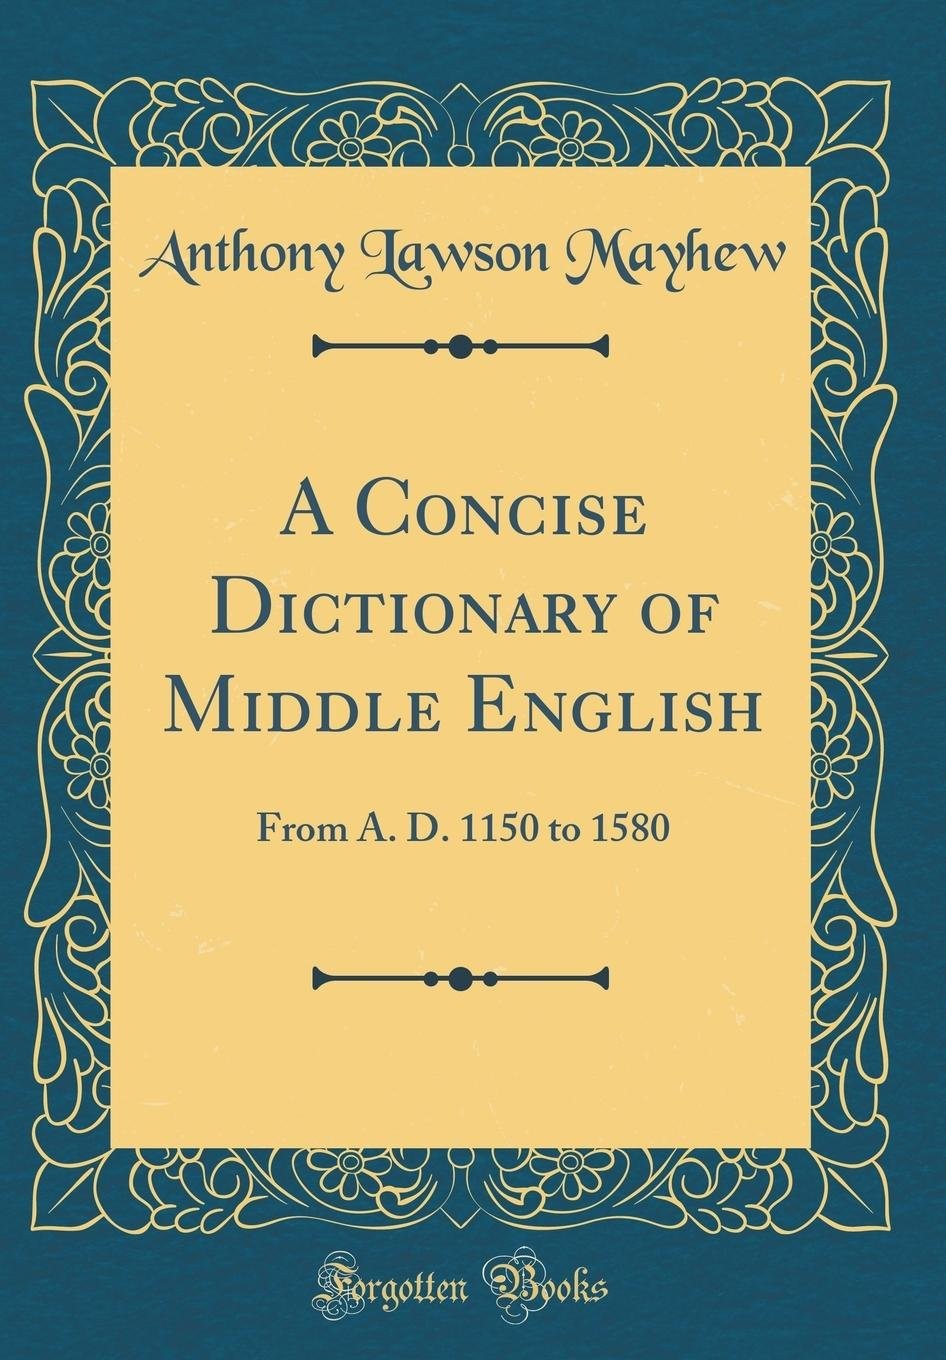 A Concise Dictionary of Middle English: From 1150 to 1580